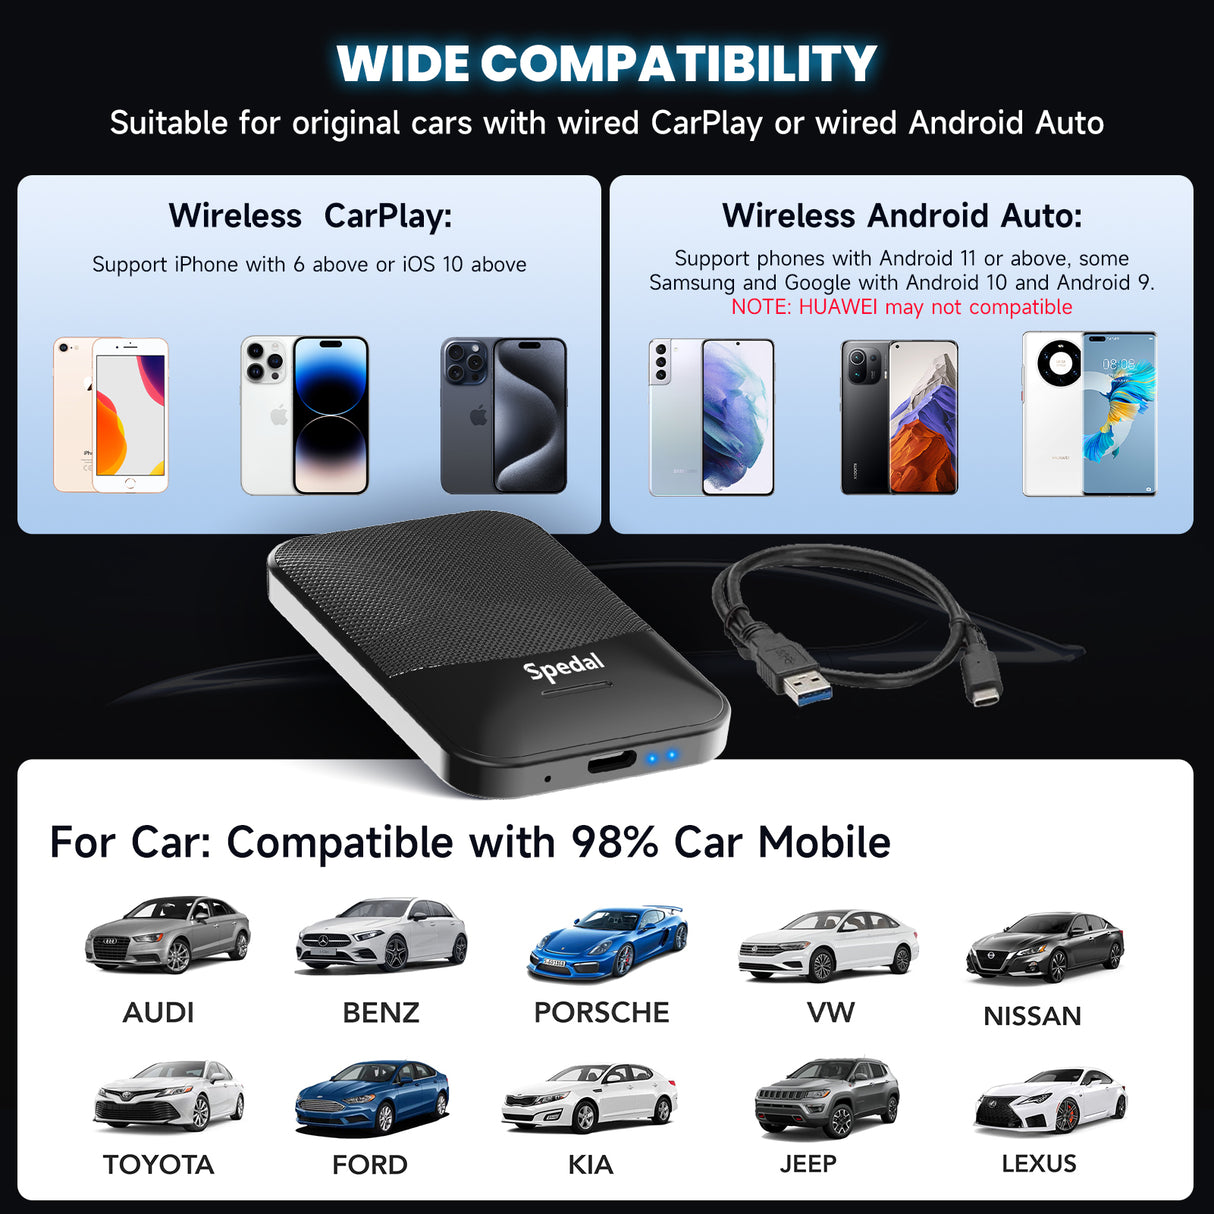 CL310-2-in-1 Wired to Wireless CarPlay Adapter & Android Auto Adapter Plug & Play